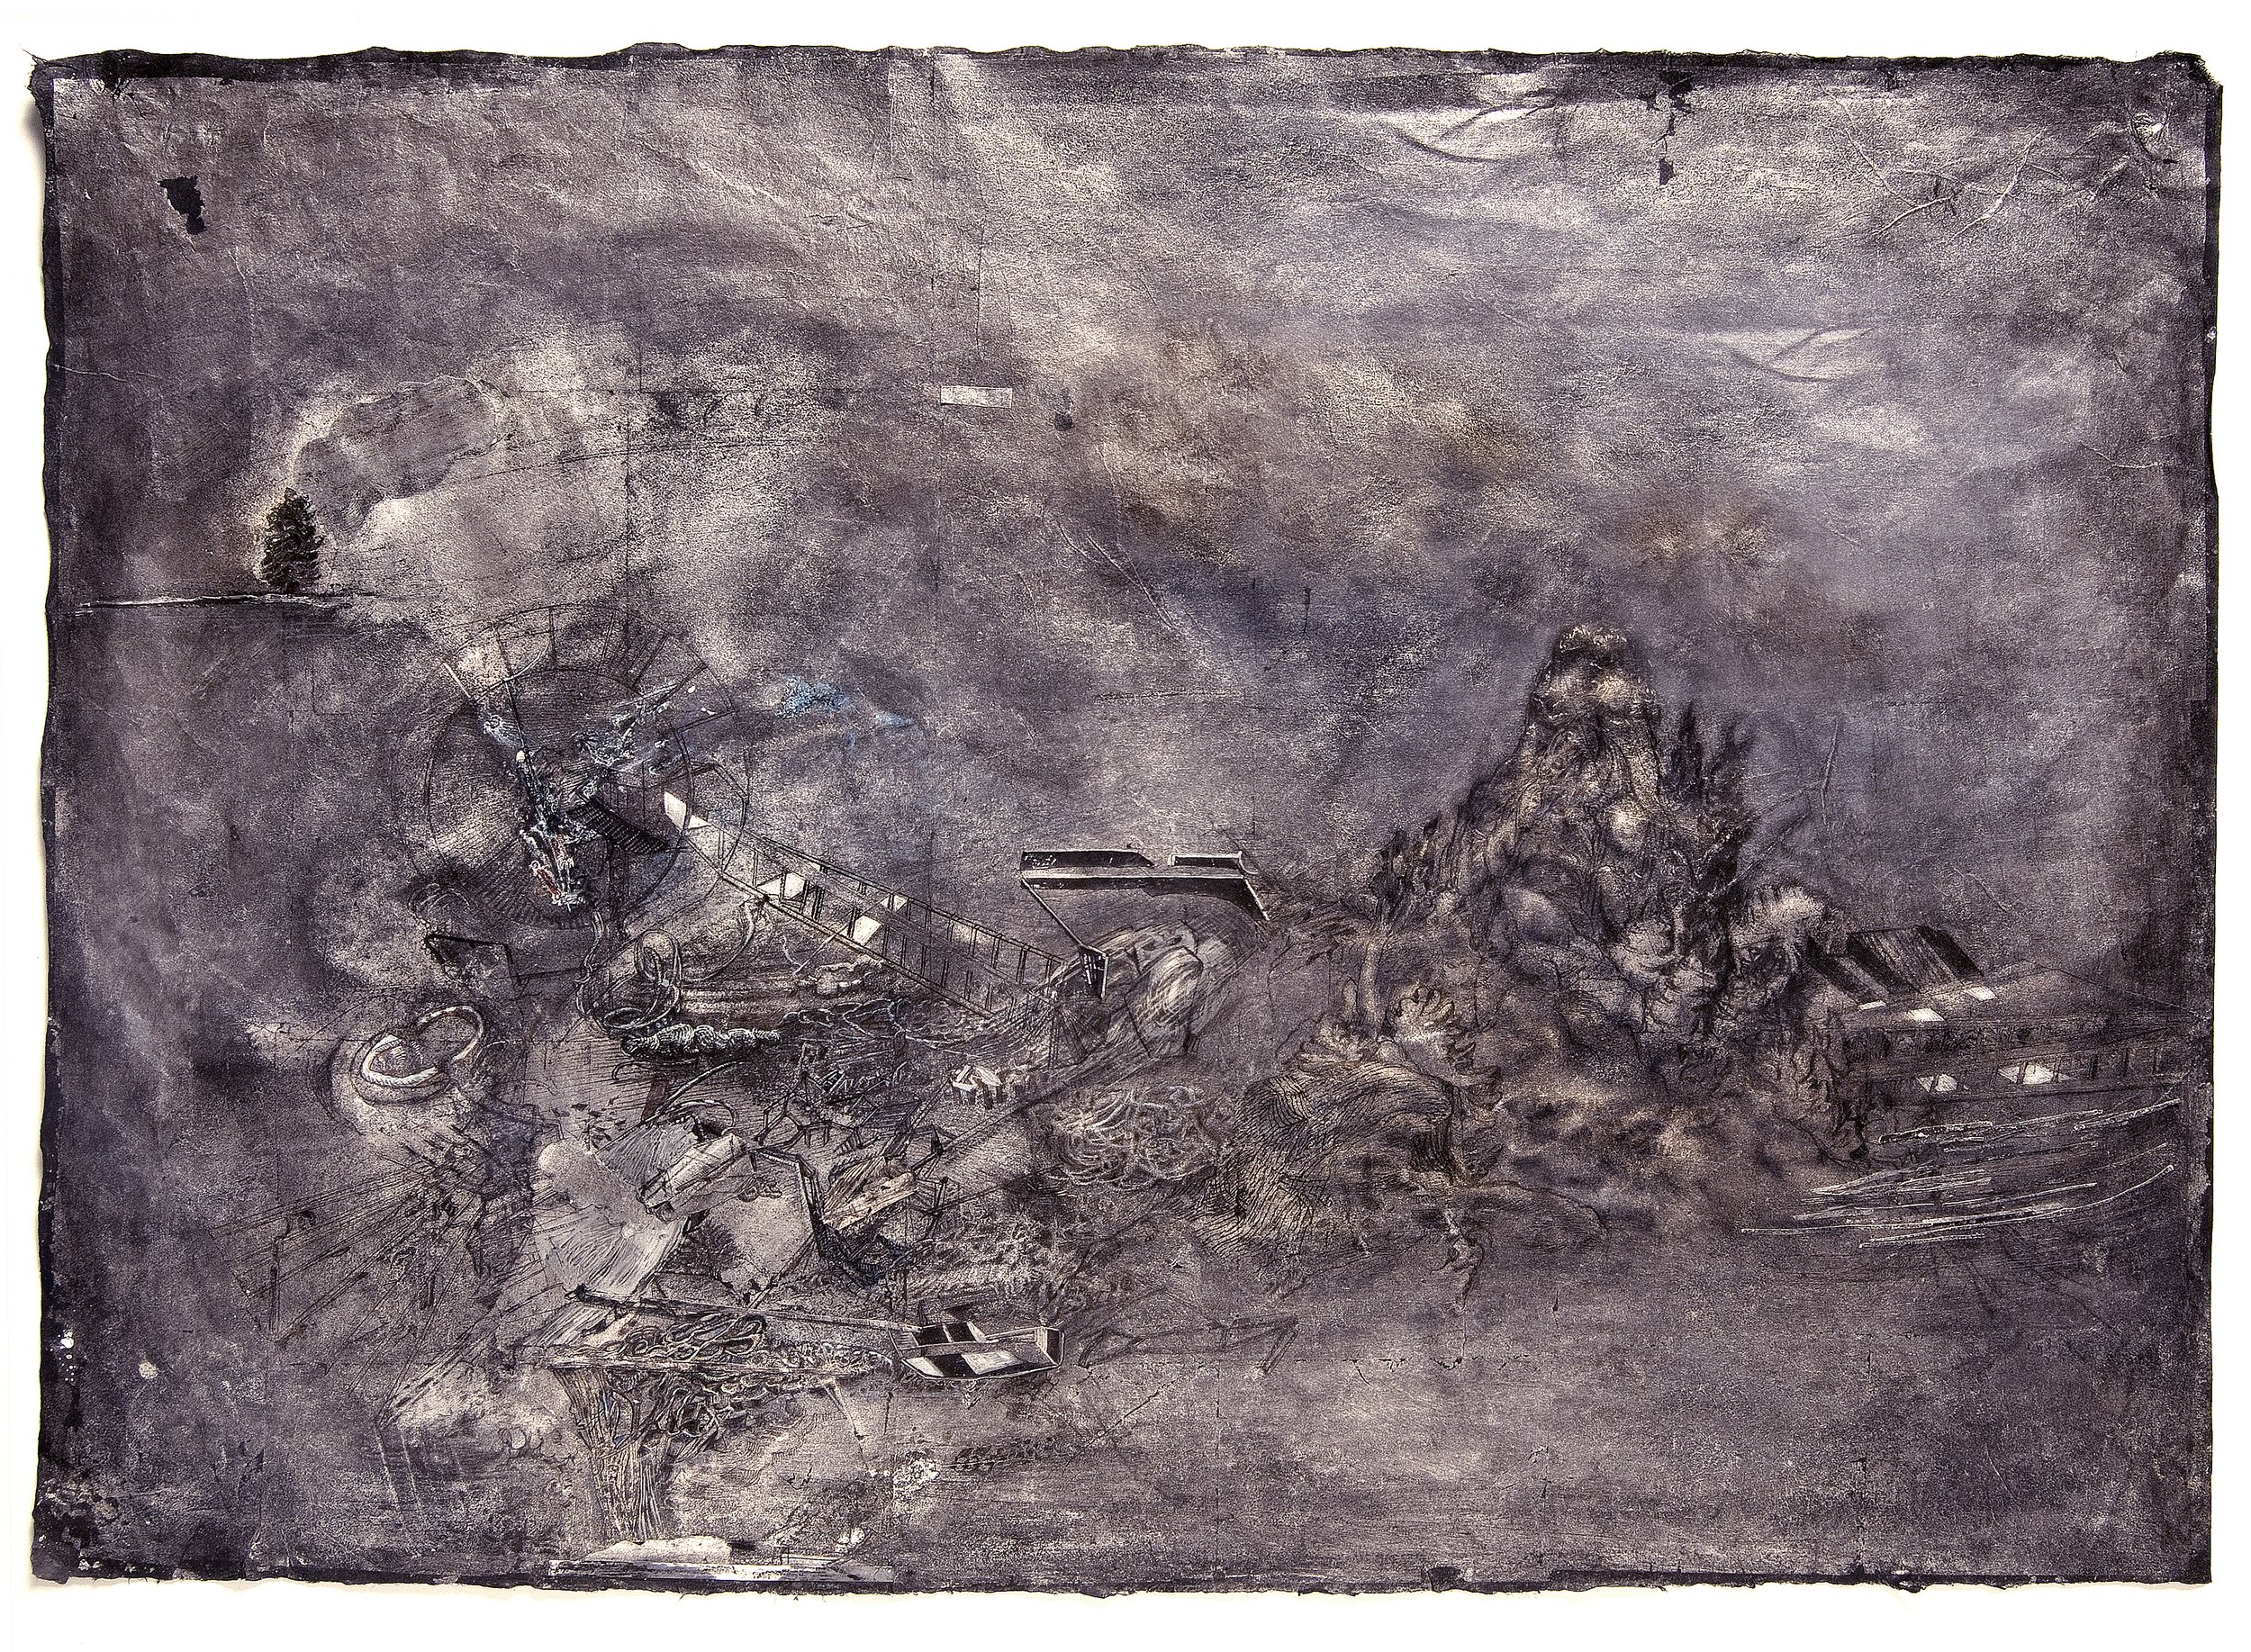   Transelsewhere , 2012  Ink, pencil, gouache, silver alloy, paper  25” h x  35” w      